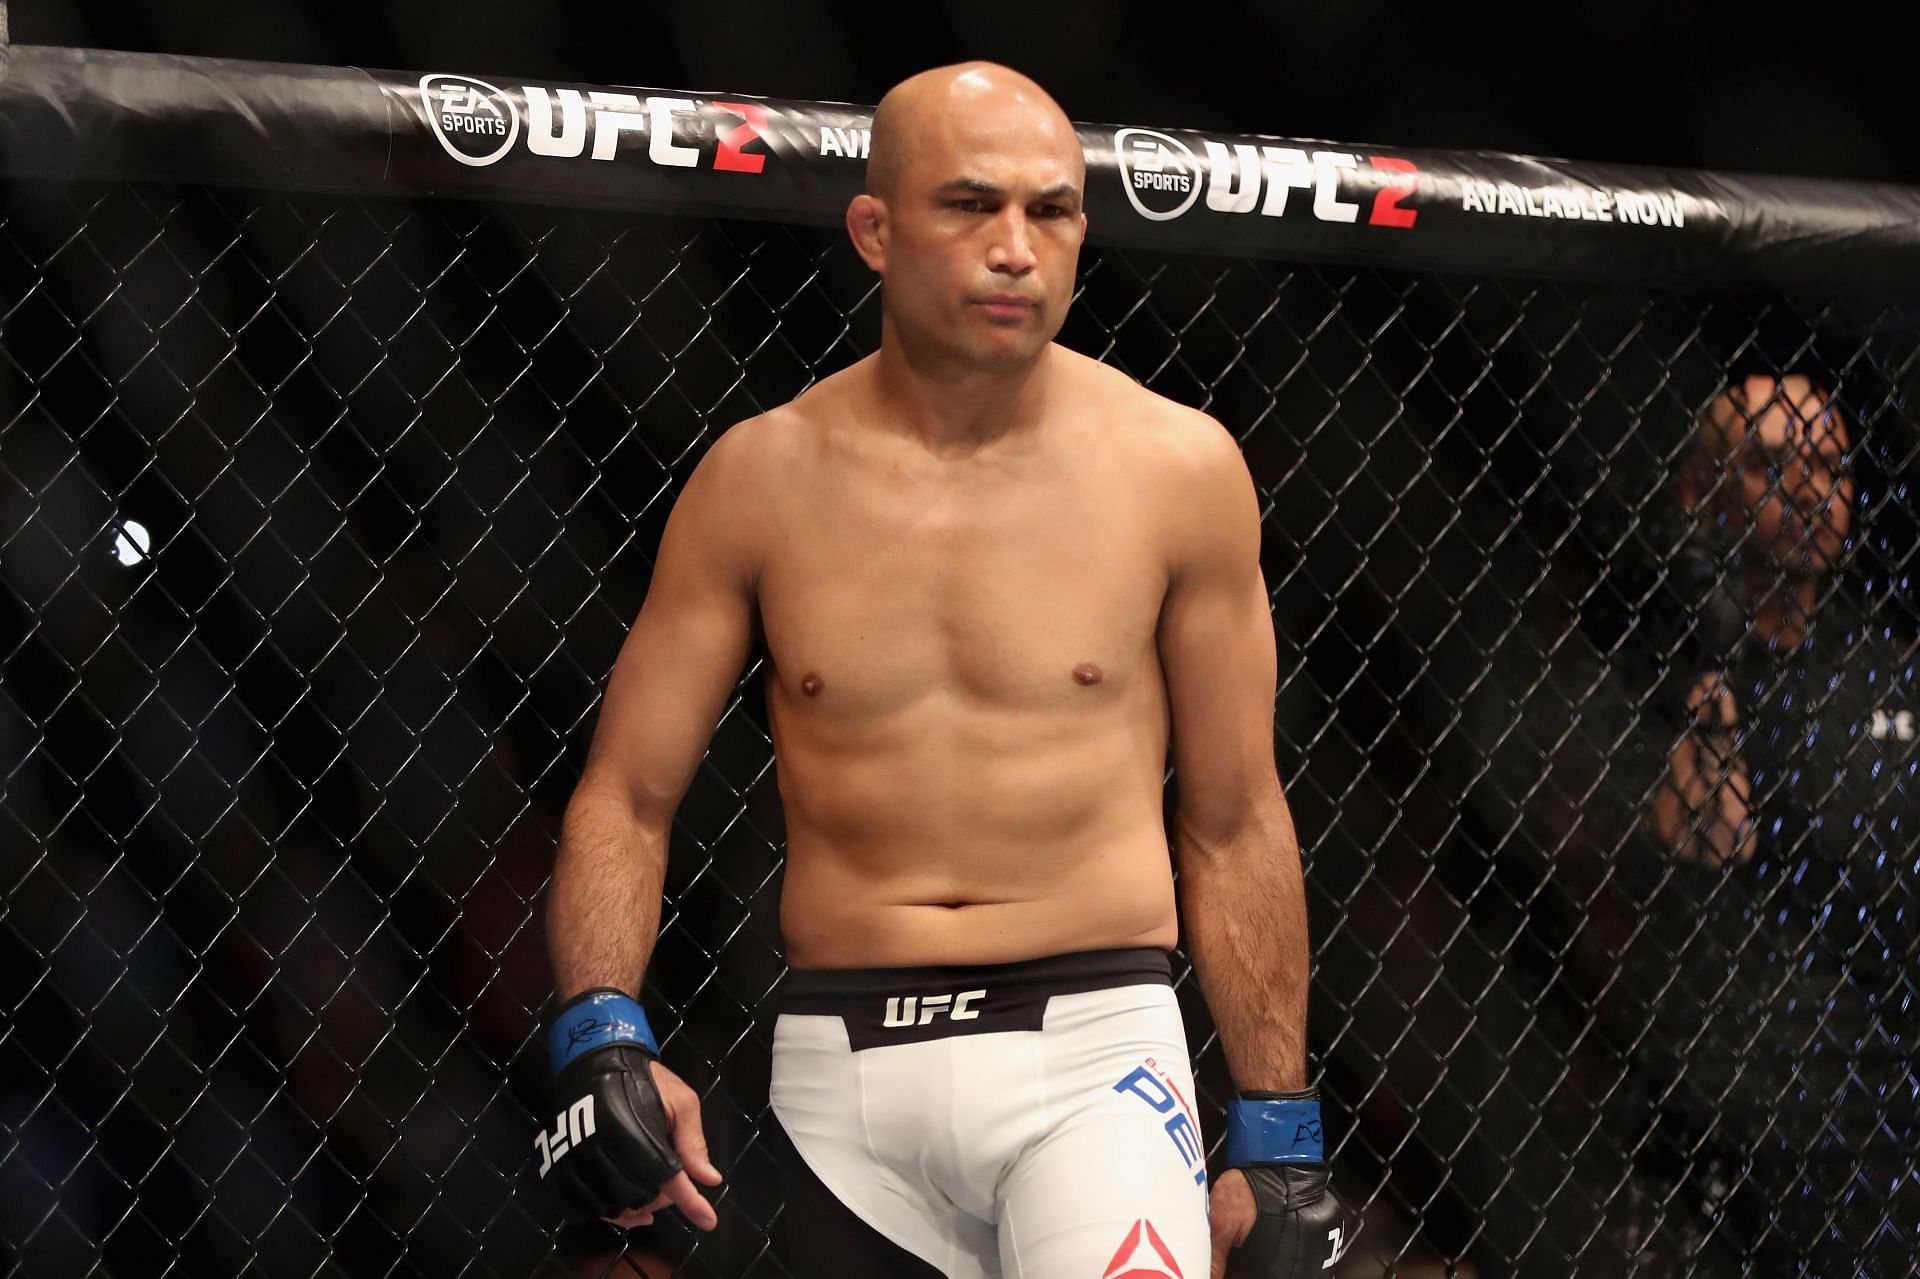 BJ Penn won three UFC title fights with rear naked chokes